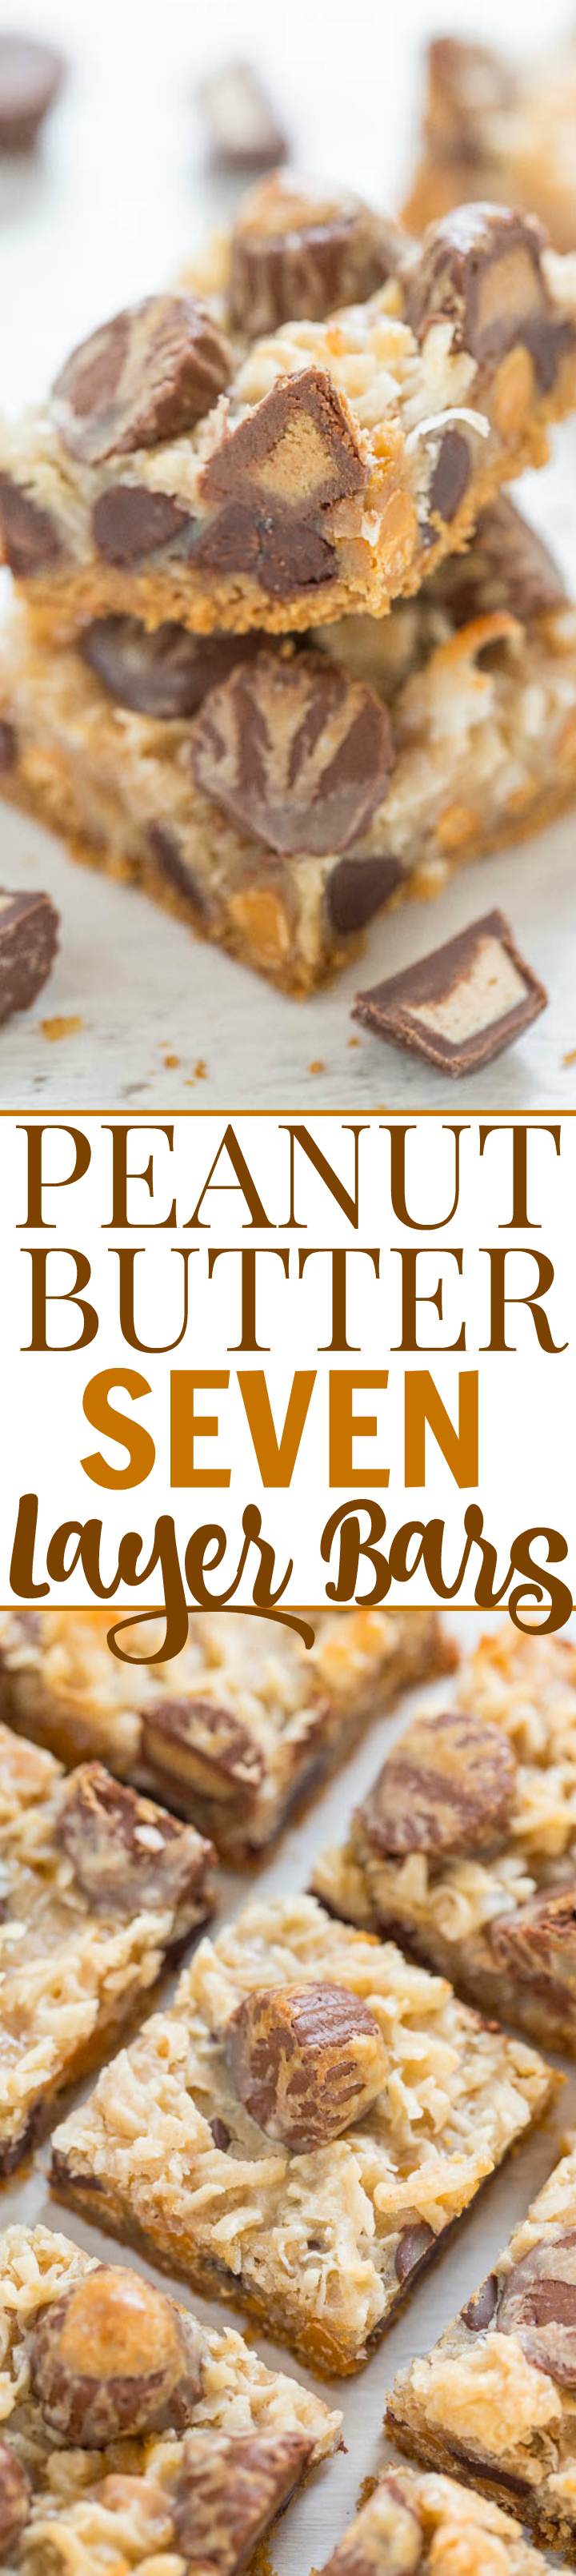 Peanut Butter Seven Layer Bars - There's peanut butter, peanut butter chips AND peanut butter cups in this fun twist on the classic recipe!! EASY no-mixer recipe that peanut butter fans will LOVE!!